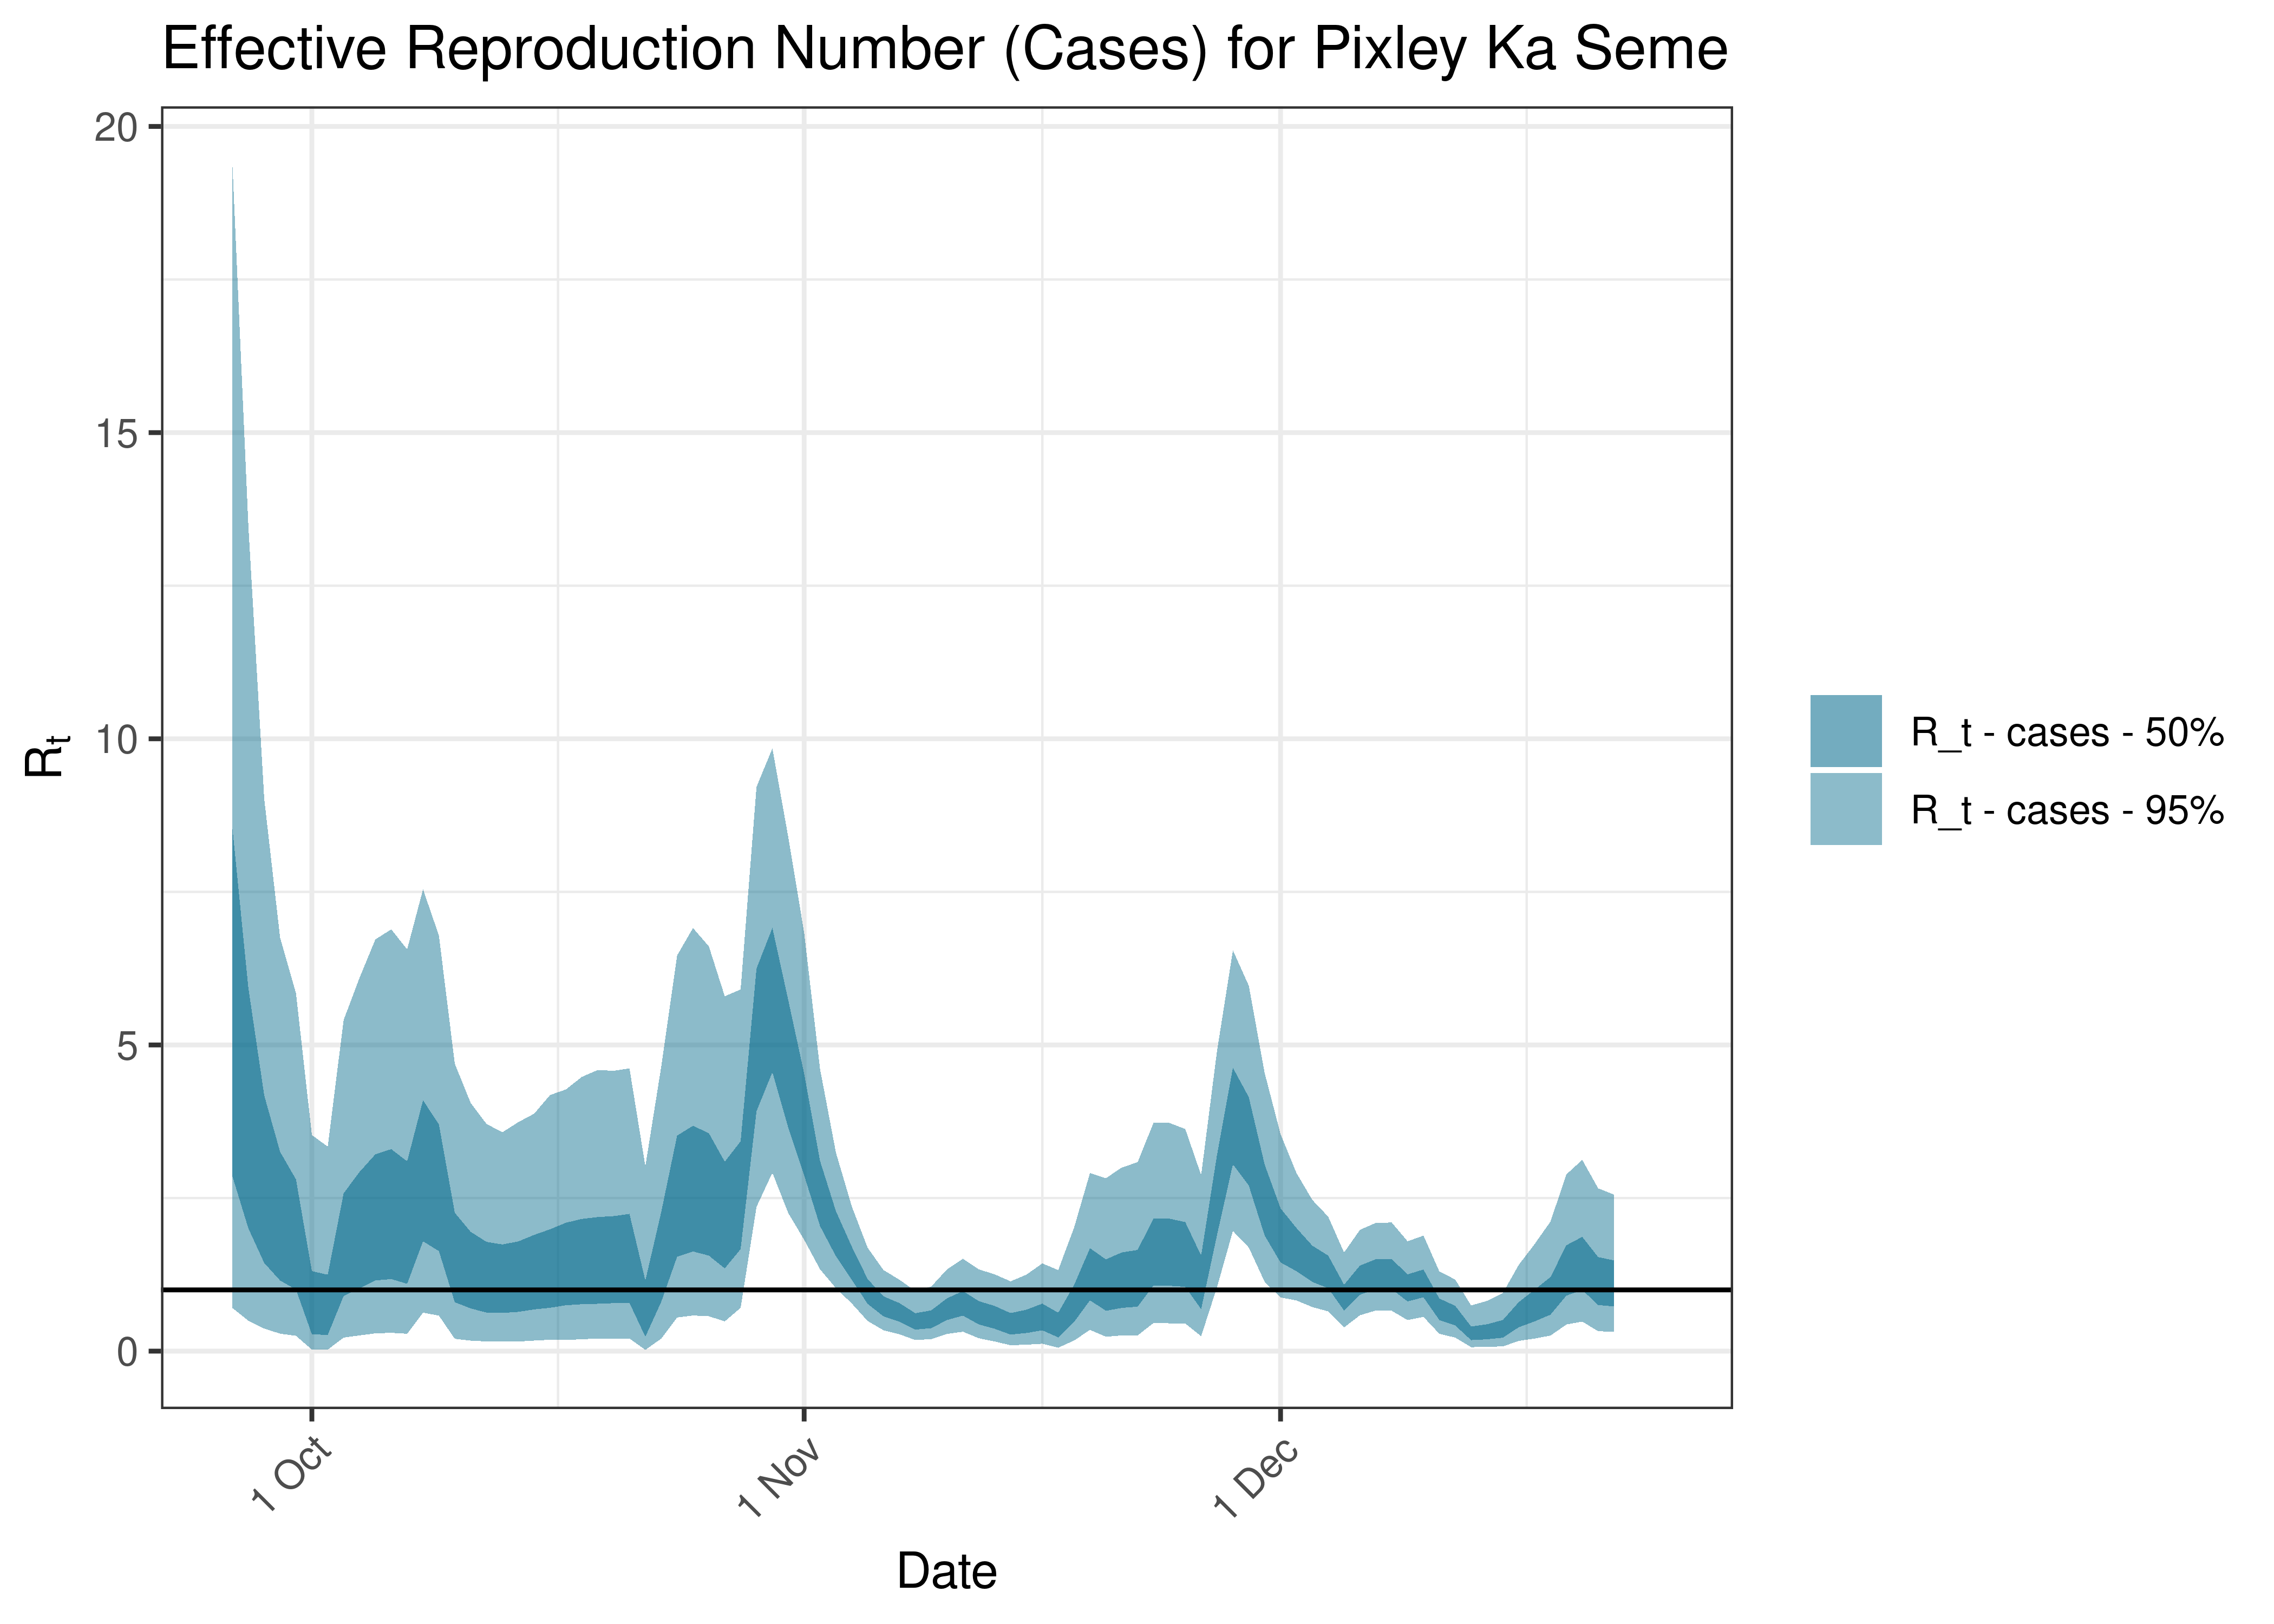 Estimated Effective Reproduction Number Based on Cases for Pixley Ka Seme over last 90 days